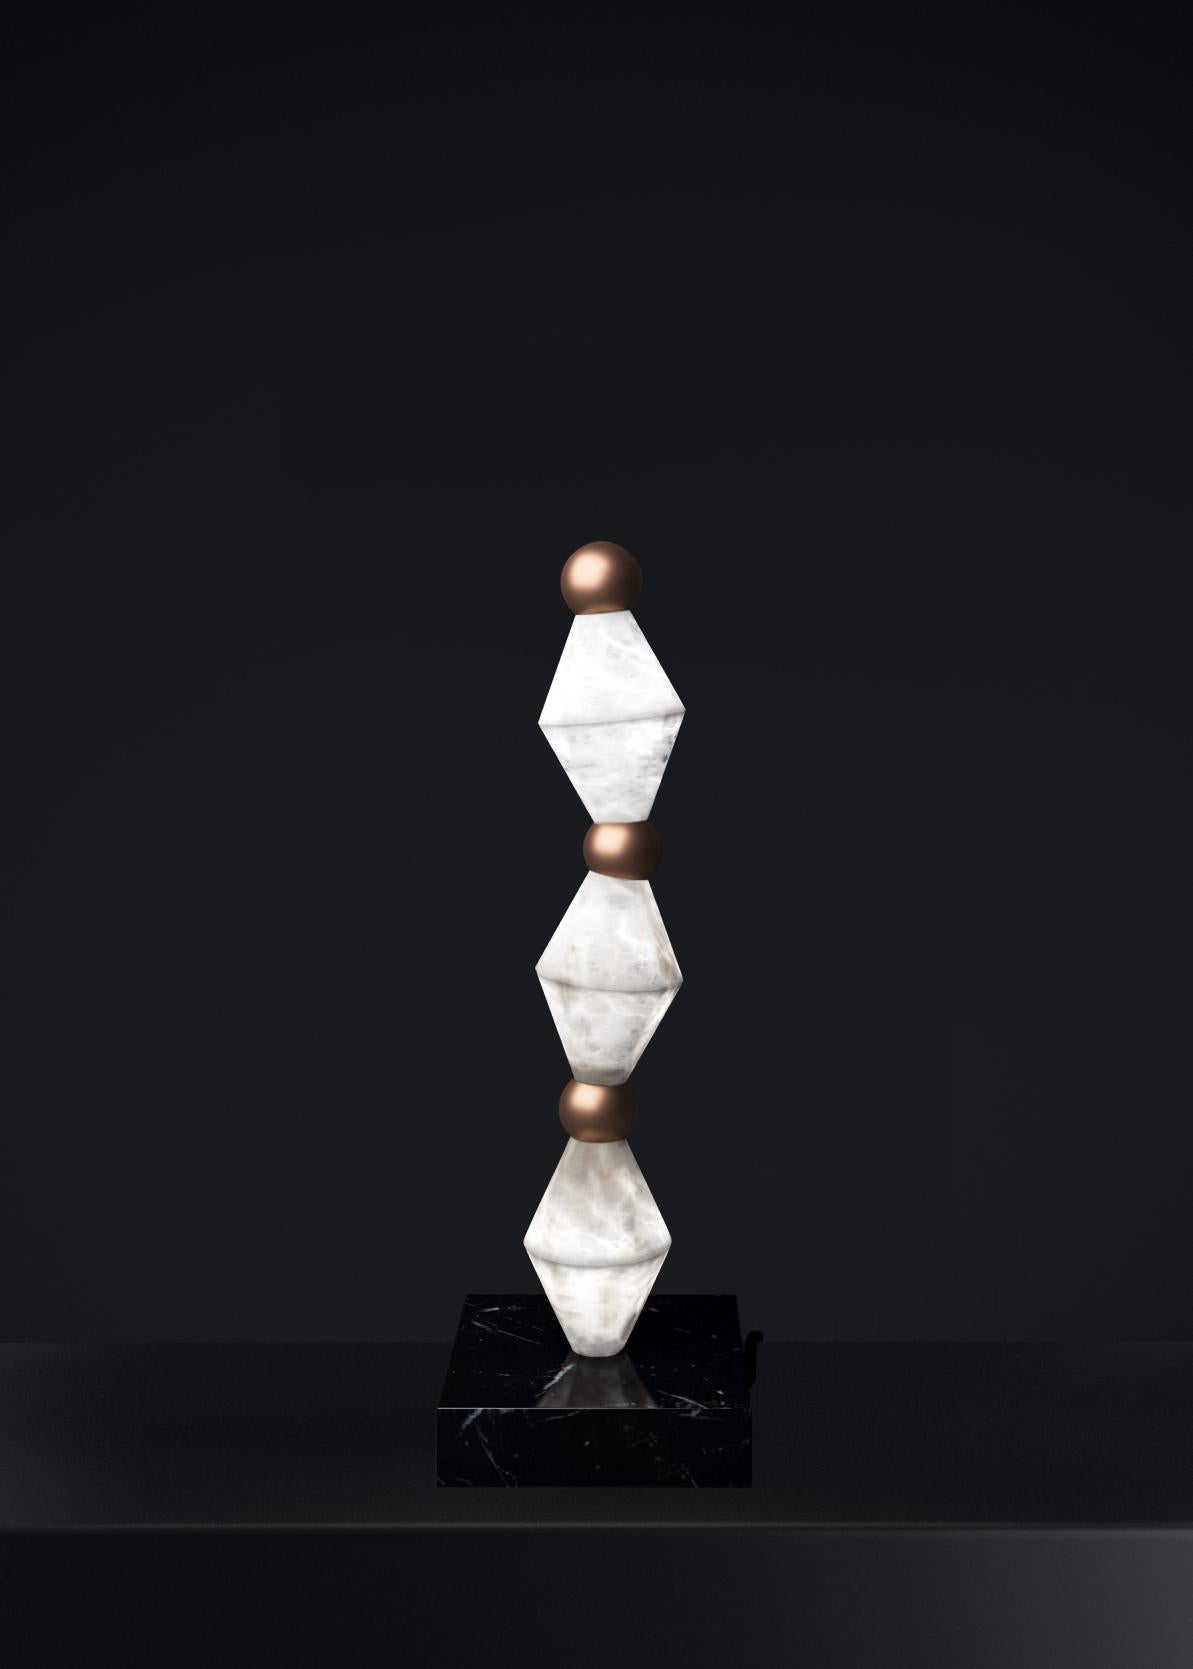 Chronos Copper Table Lamp by Alabastro Italiano
Dimensions: D 15 x W 15 x H 71,5 cm.
Materials: White alabaster, marble and copper.

Available in different finishes: Shiny Silver, Bronze, Brushed Brass, Ruggine of Florence, Brushed Burnished, Shiny